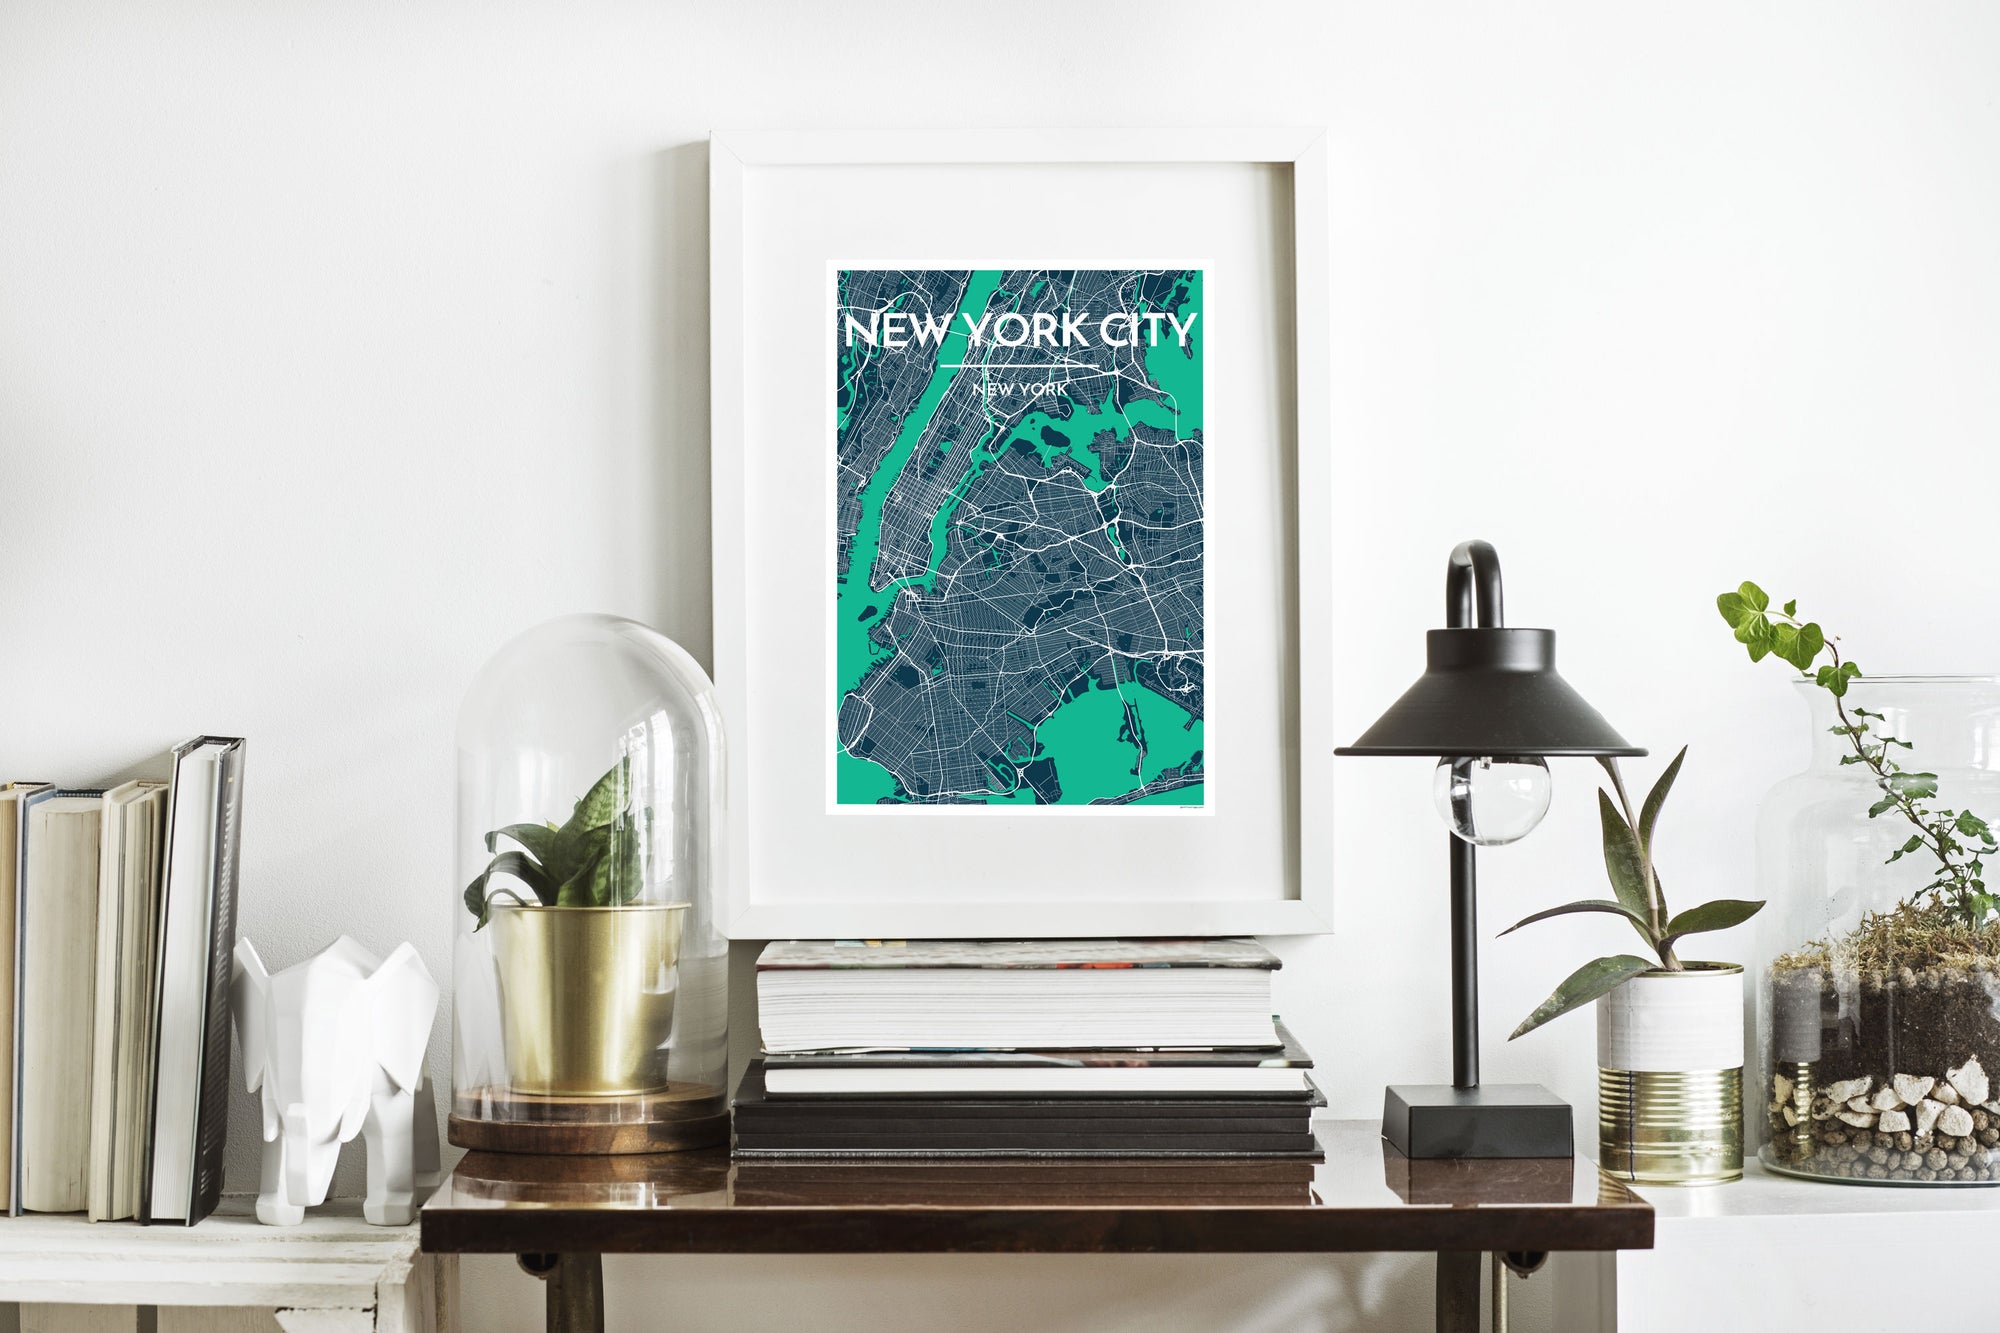 Custom City Map Prints: How Personalized Art Tells Your Unique Story